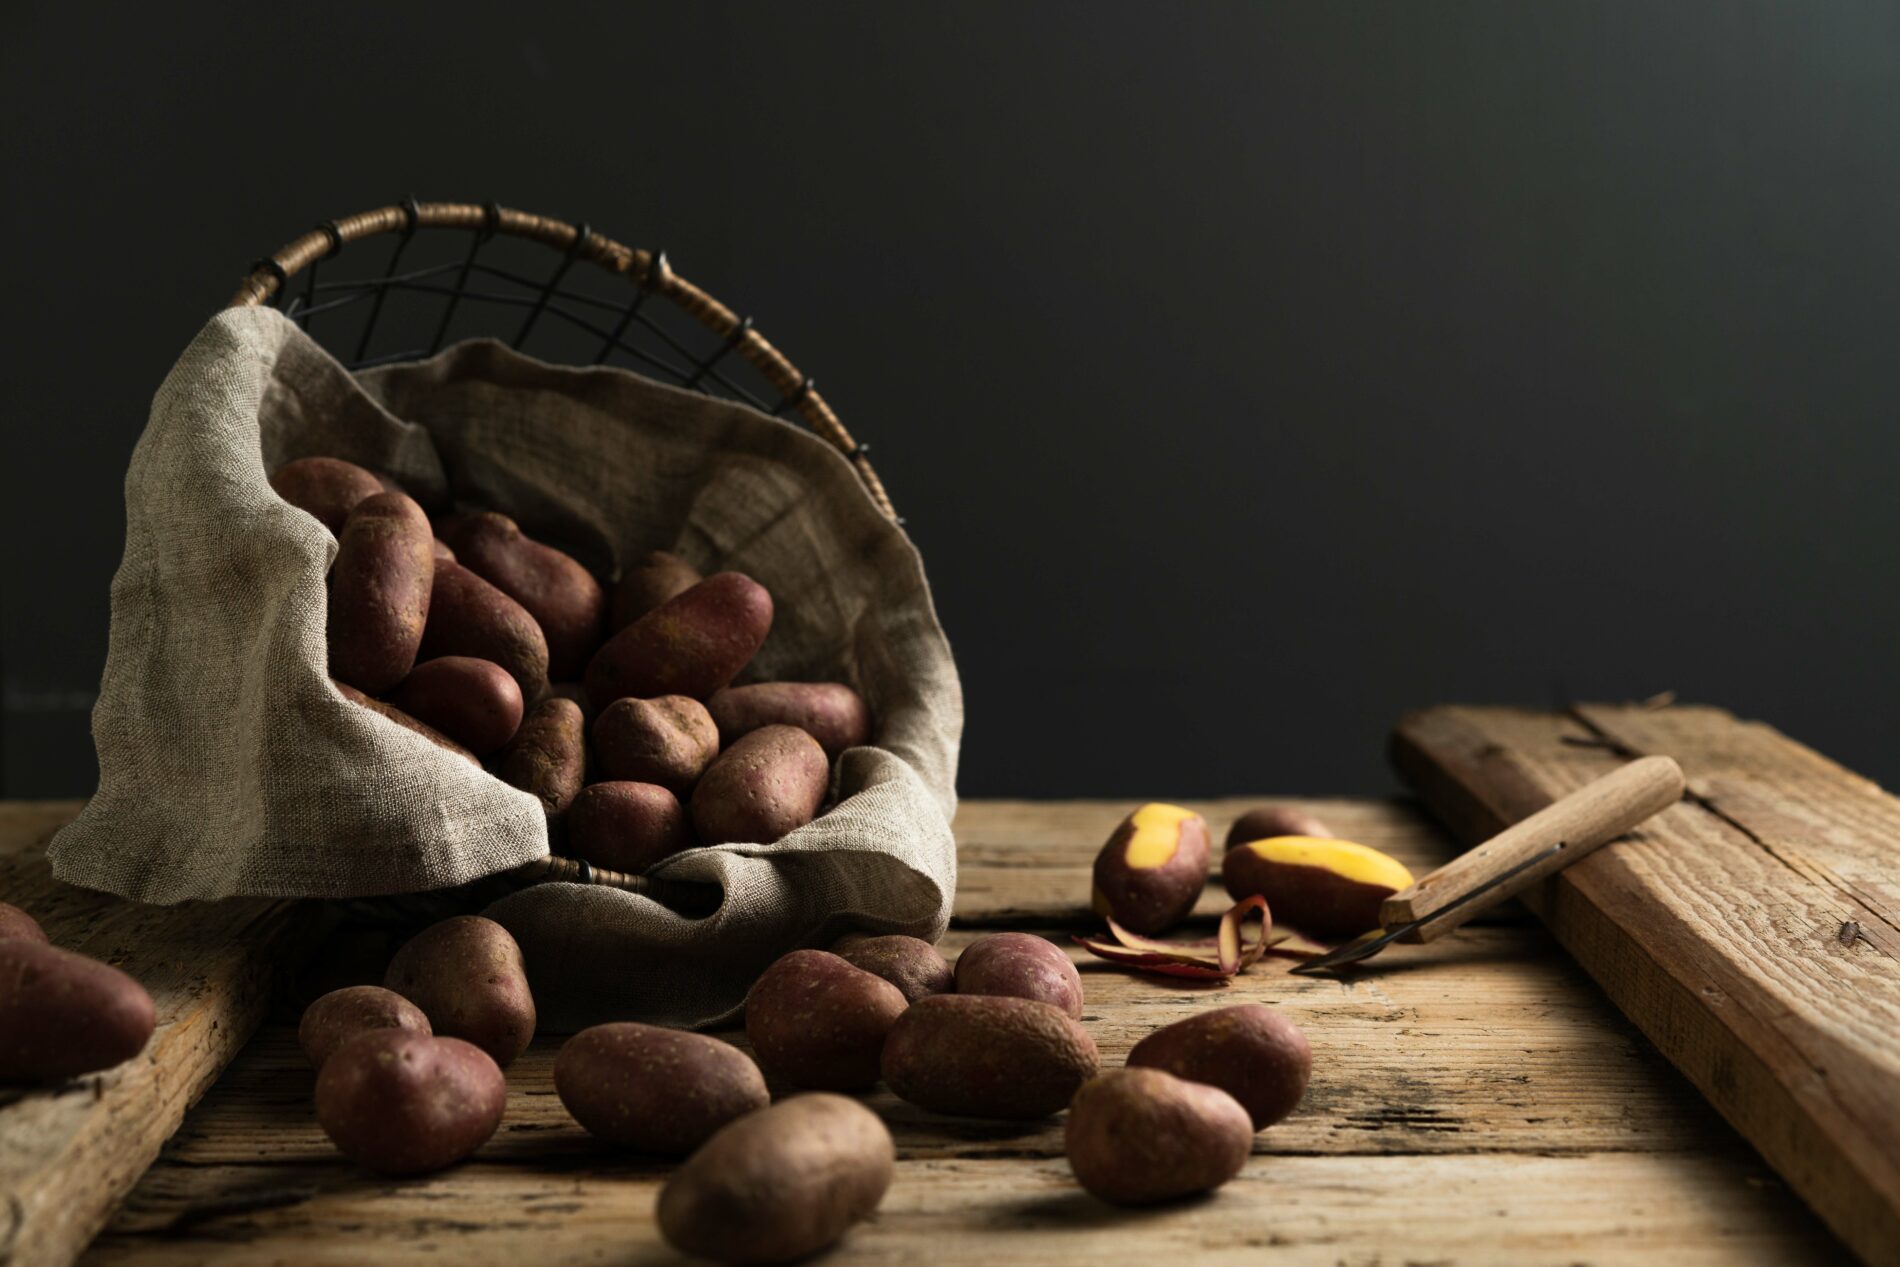 Red-skinned potatoes fallen out of a basket